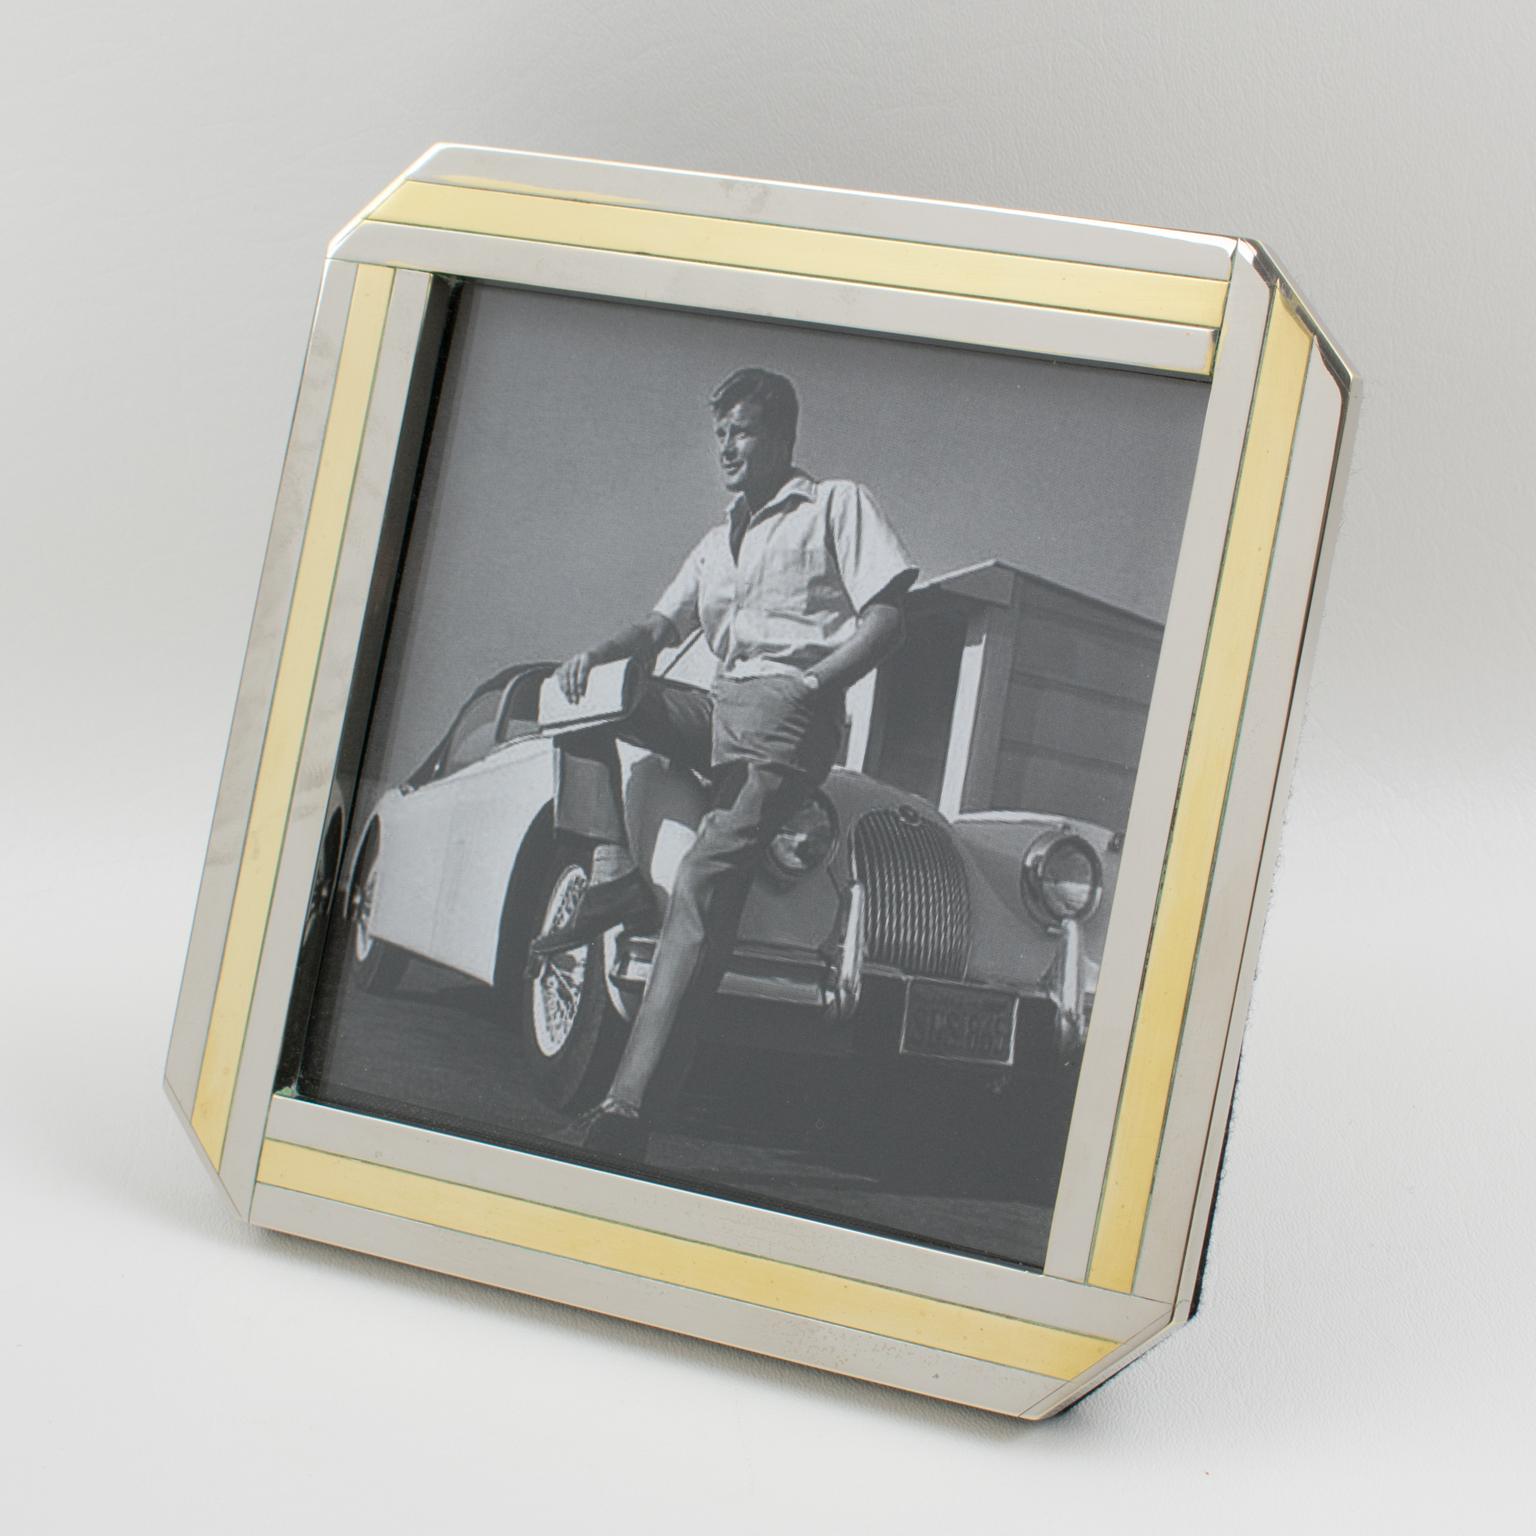 This stylish picture frame from the 1970s was designed and crafted by Italian designer A. Elle. The gilded brass and chrome geometric design has a Kinetic effect. The easel and back are in black felt, and the frame has a glass protection on the